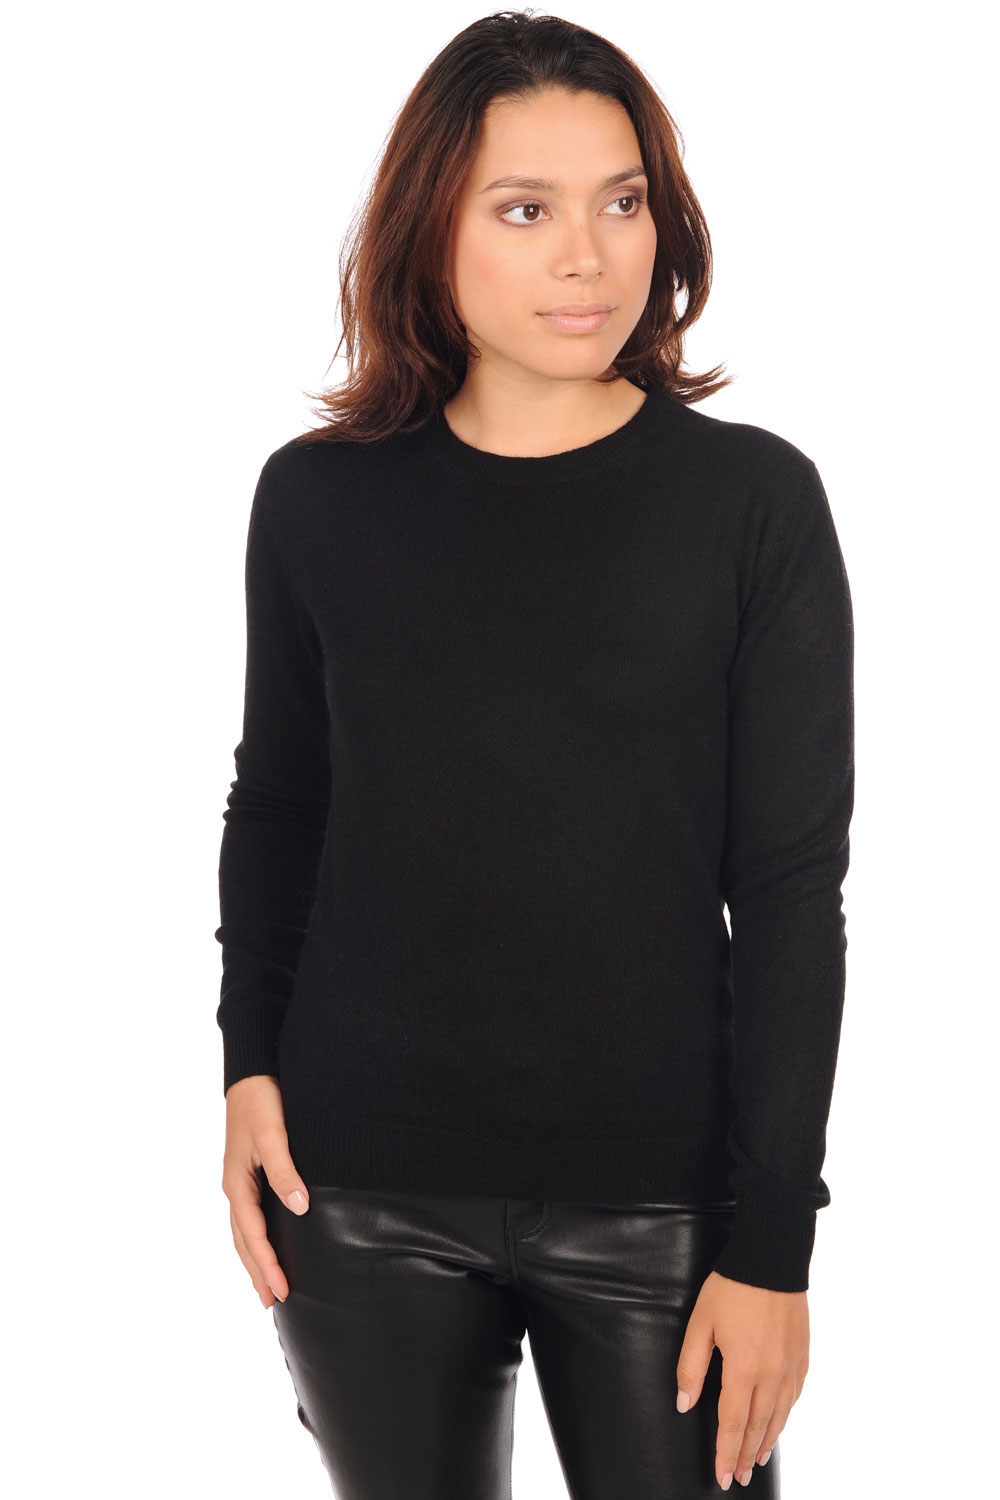 Cashmere ladies basic sweaters at low prices thalia first black m